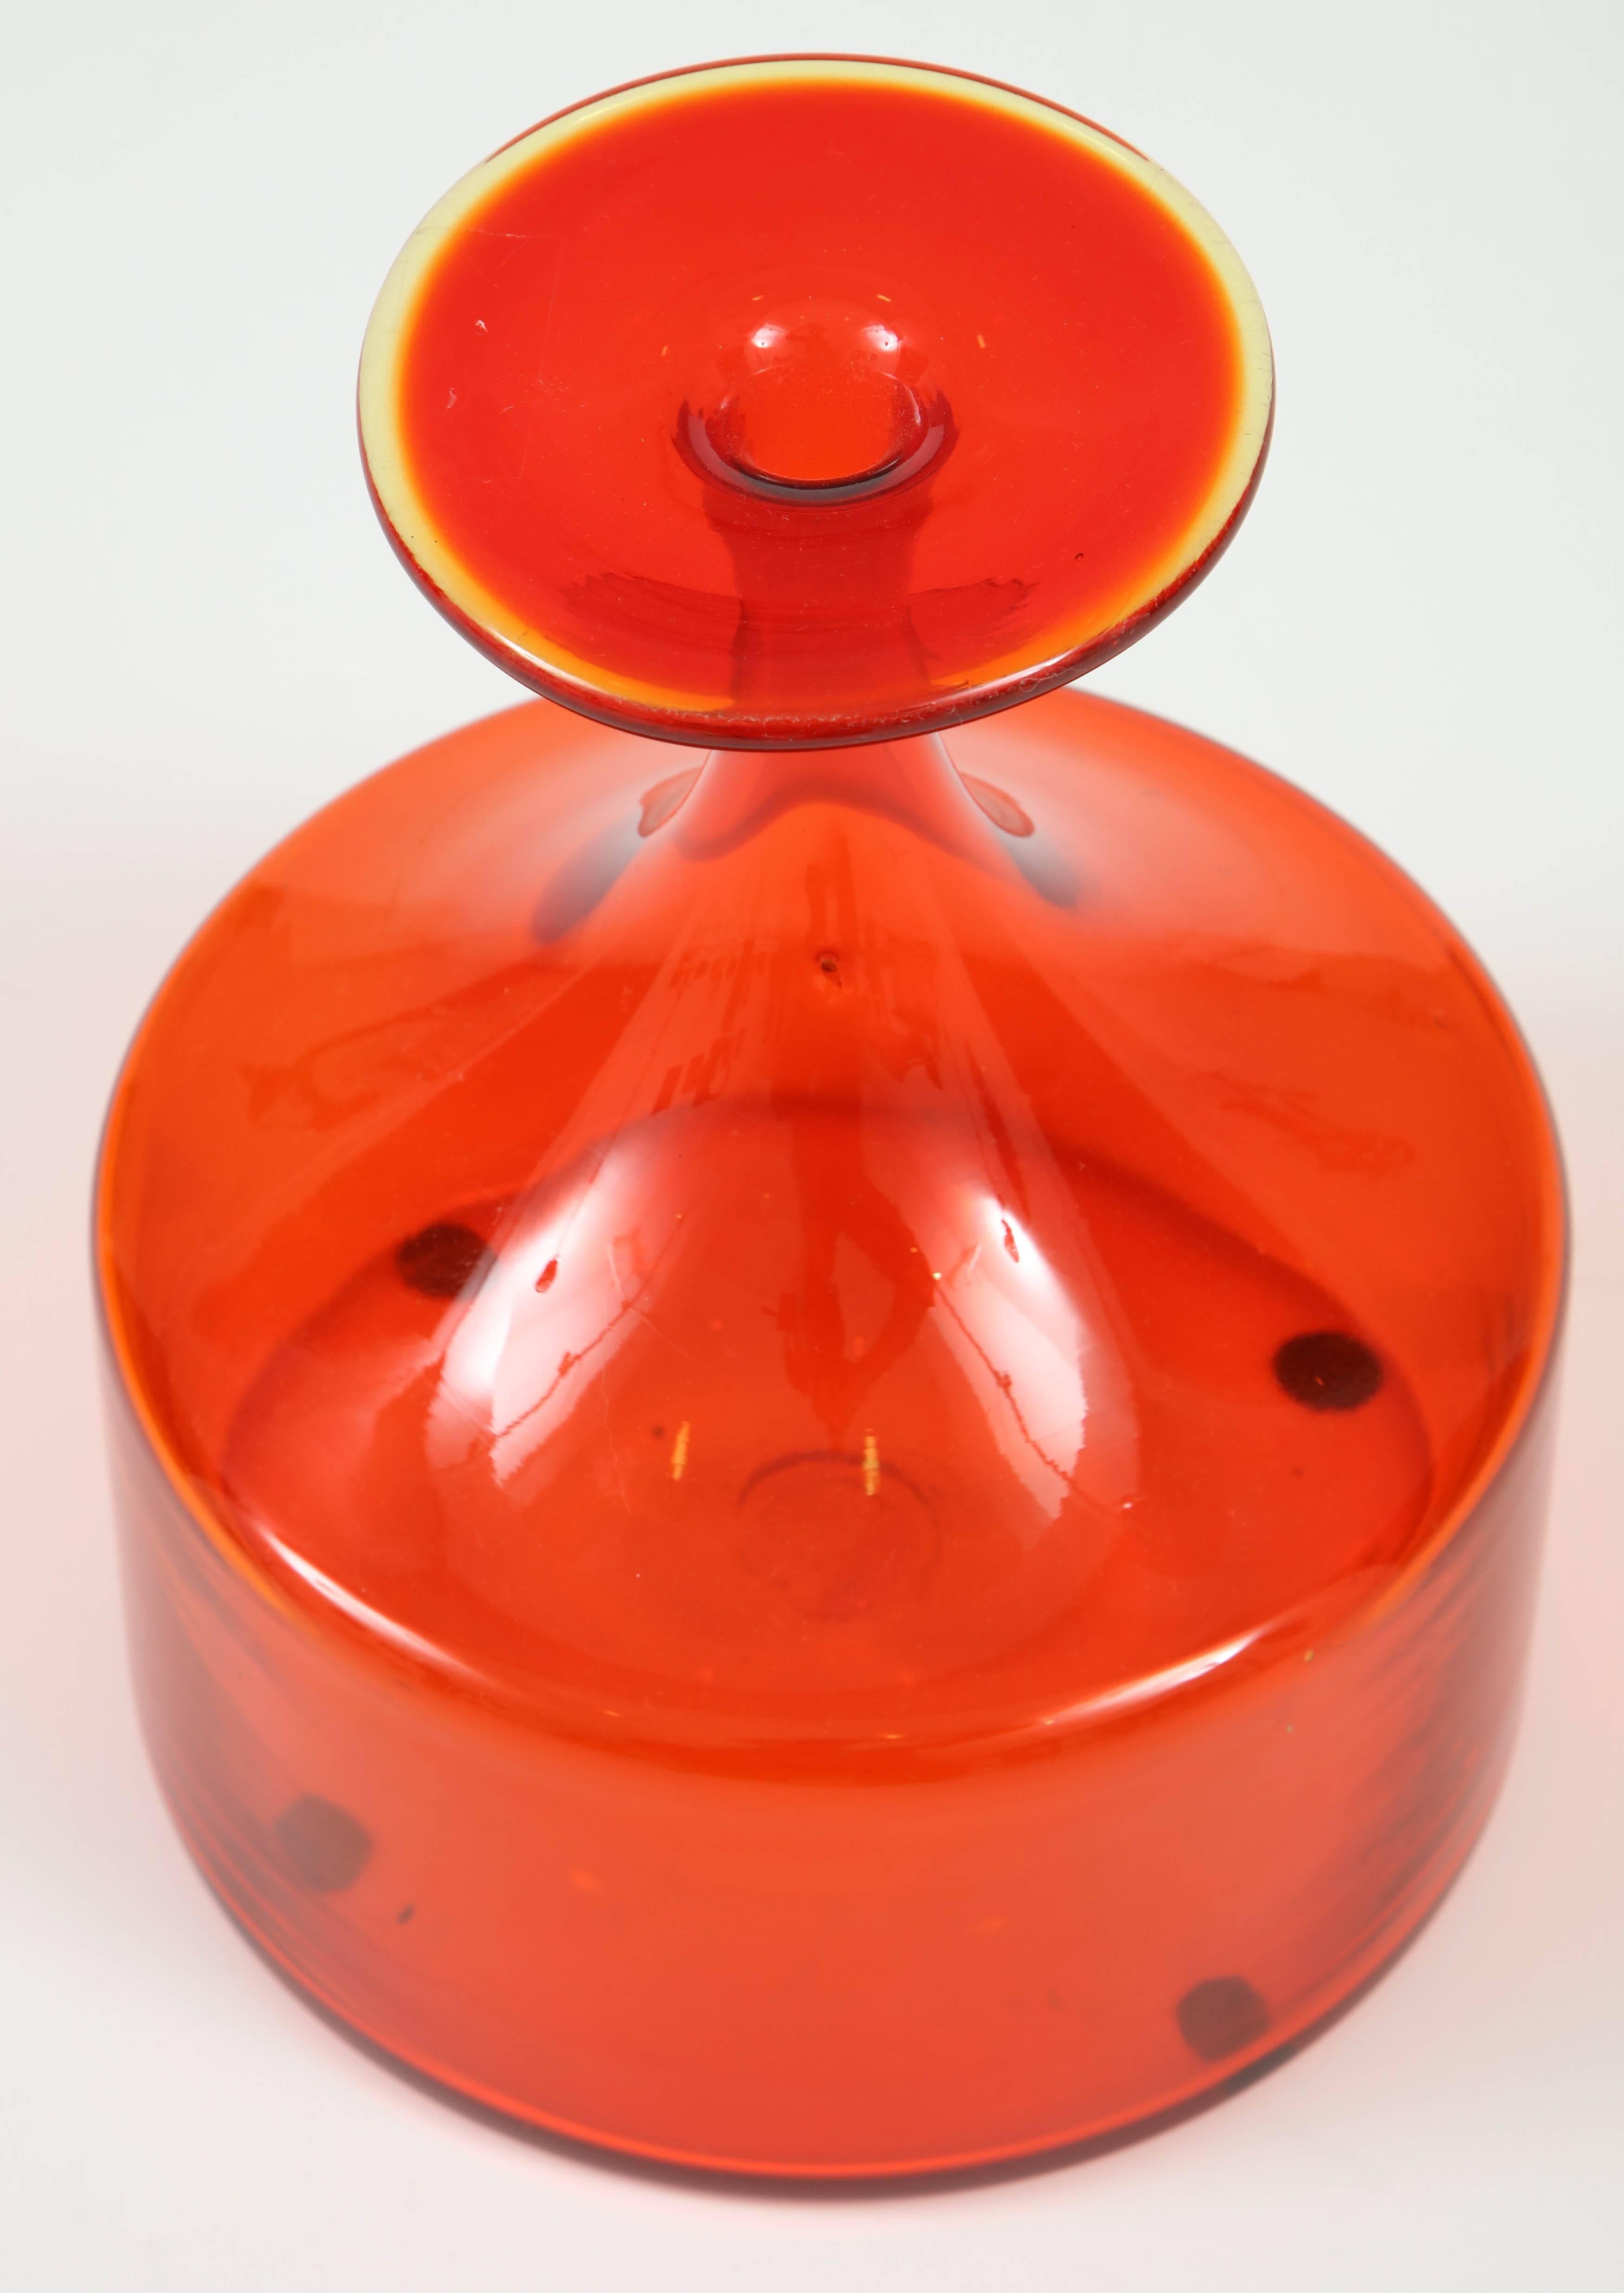 Greenwich Flint Craft vase from circa 1950, midcentury. Beautiful red/orange color and very good condition.